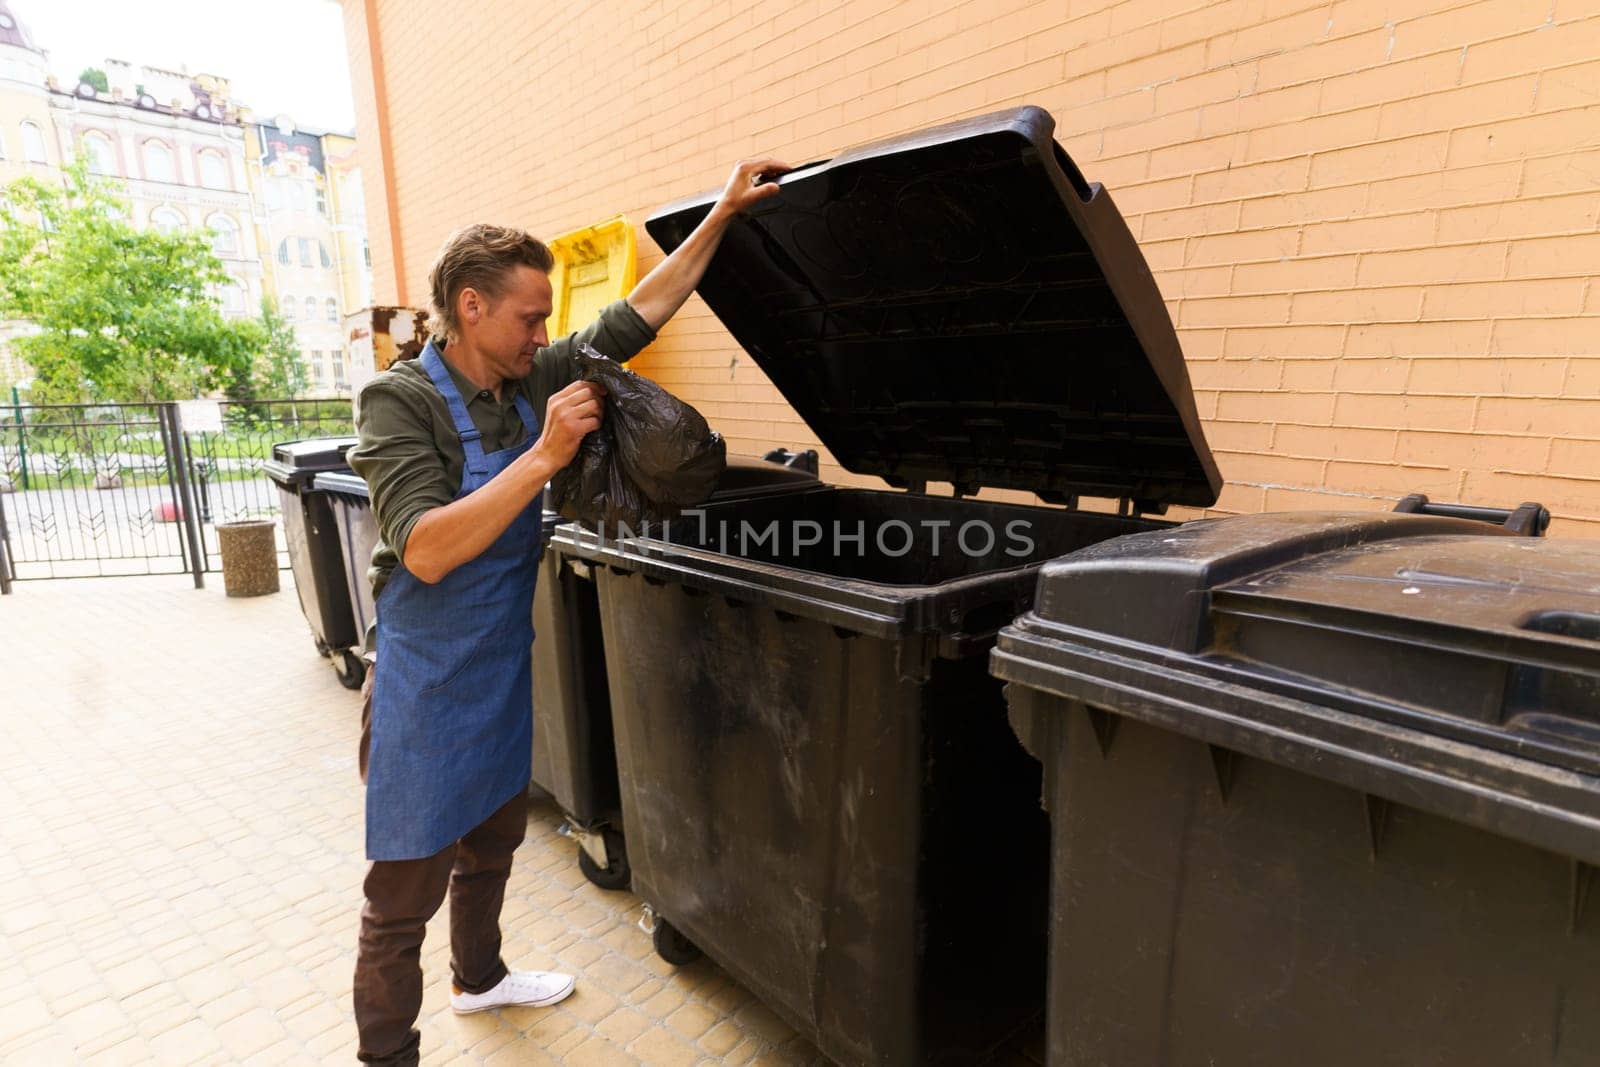 Waiter or kitchen worker responsibly disposing of garbage in pocket and placing it in city trash bin located in back yard. Focus on maintaining cleanliness and proper waste management in urban environment. . High quality photo